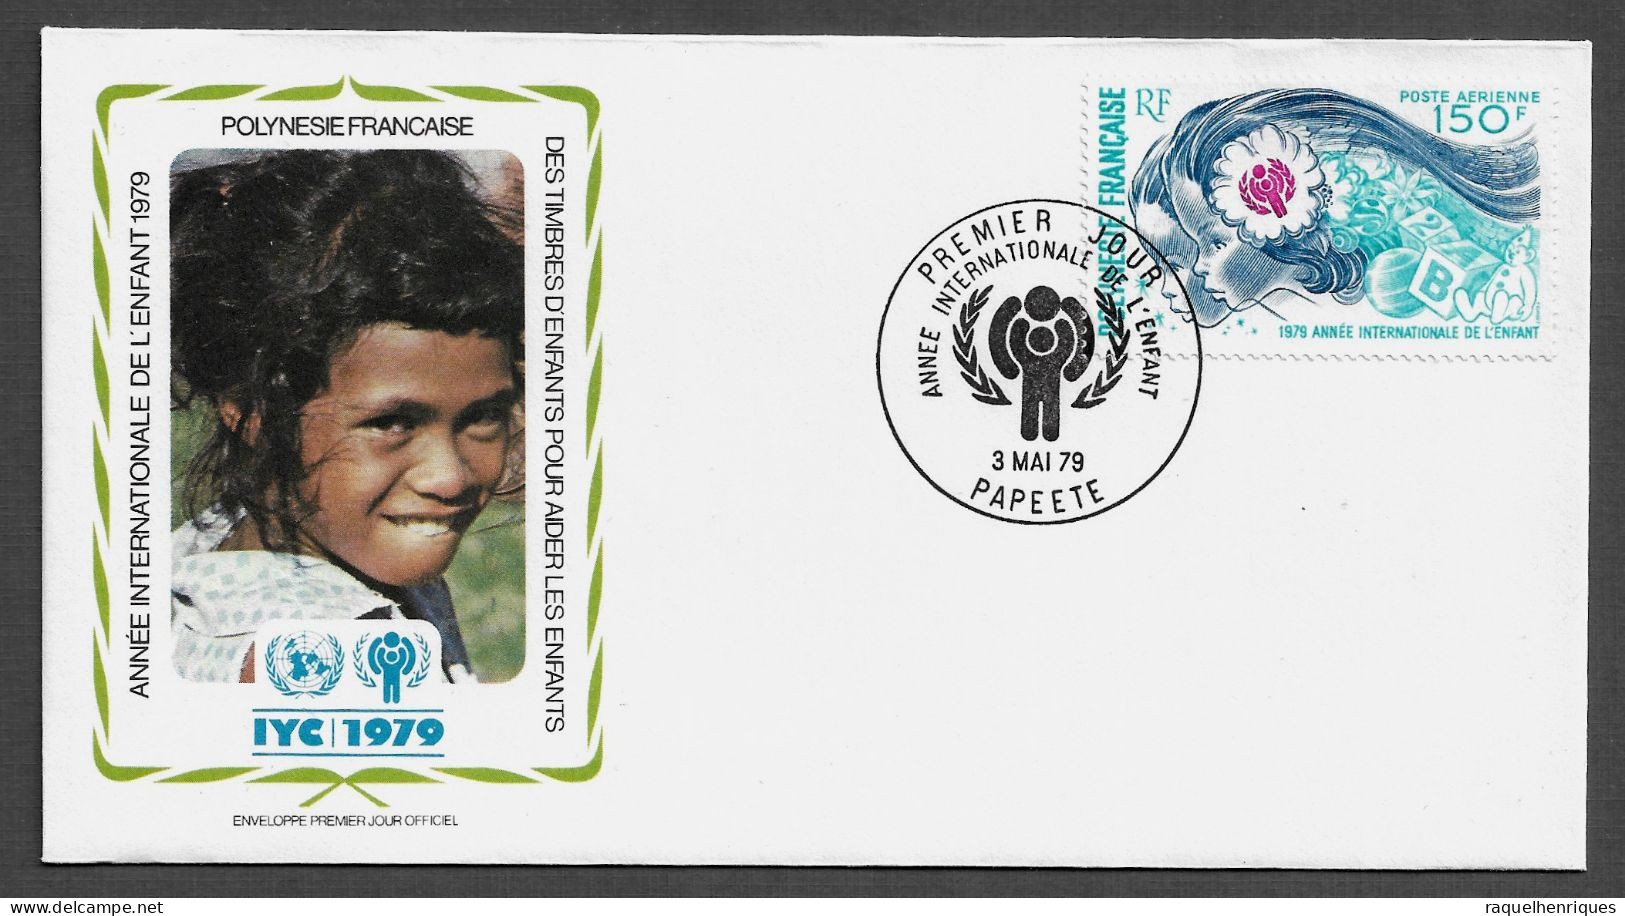 FRENCH POLYNESIA FDC COVER - 1979 International Year Of The Child SET FDC (FDC79#07) - Brieven En Documenten